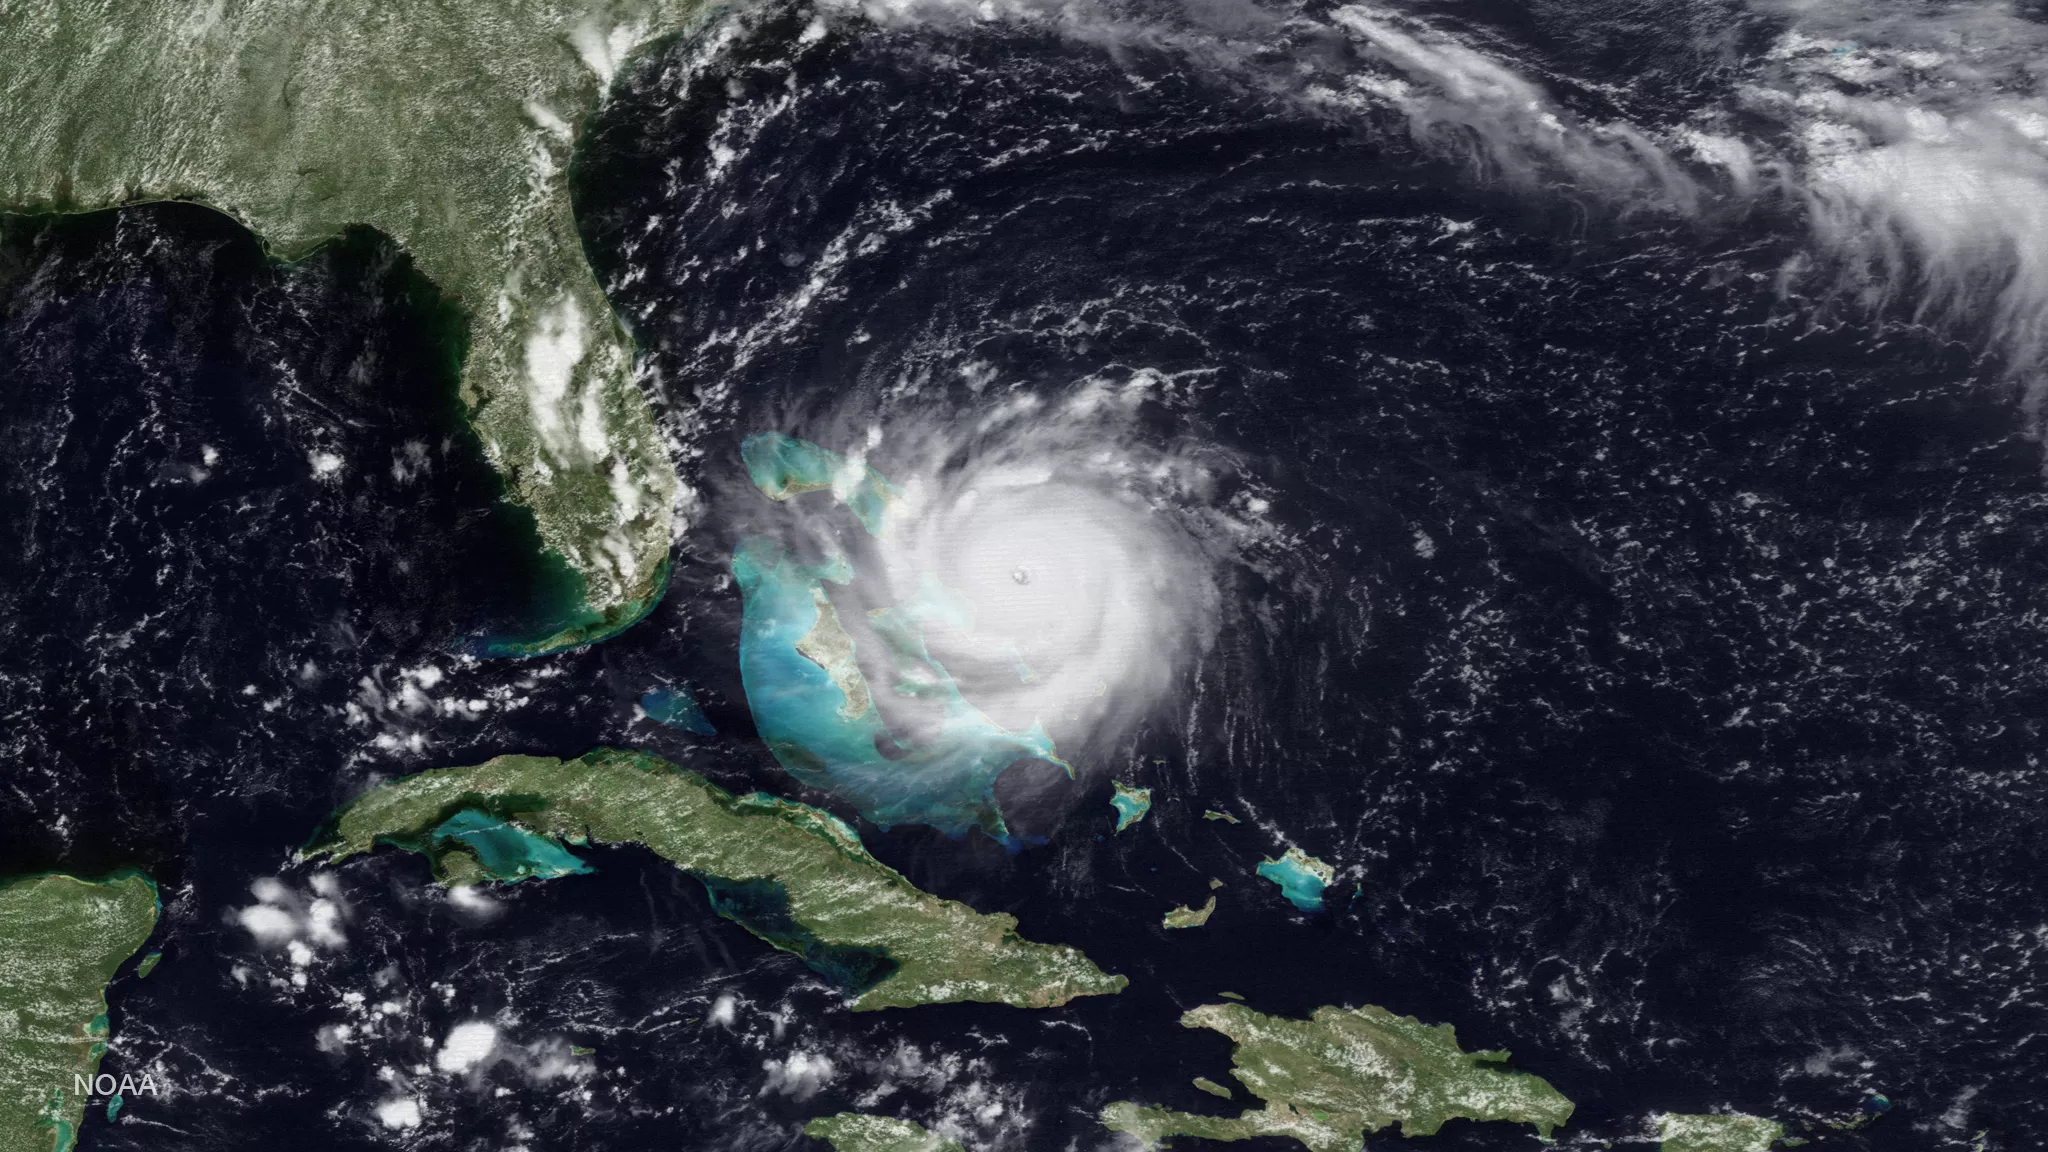 Image of Hurricane Andrew August 23, 1992 approaching the Bahamas